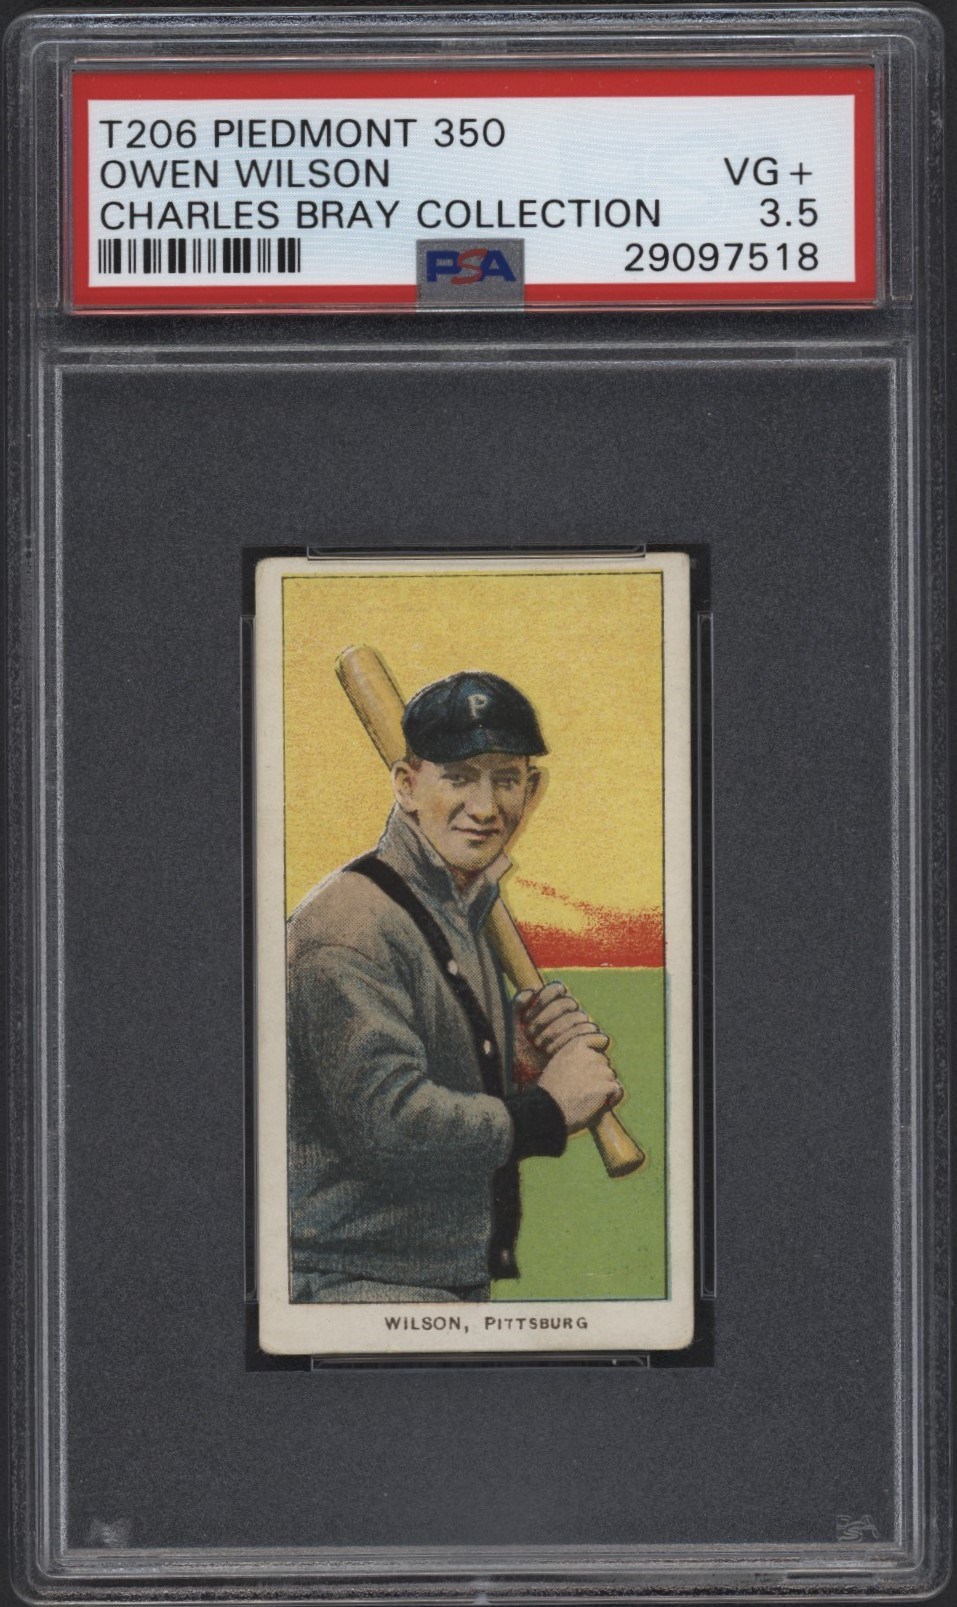 Baseball and Trading Cards - T206 Piedmont 350 Owen Wilson PSA 3.5 From the Charles Bray Collection